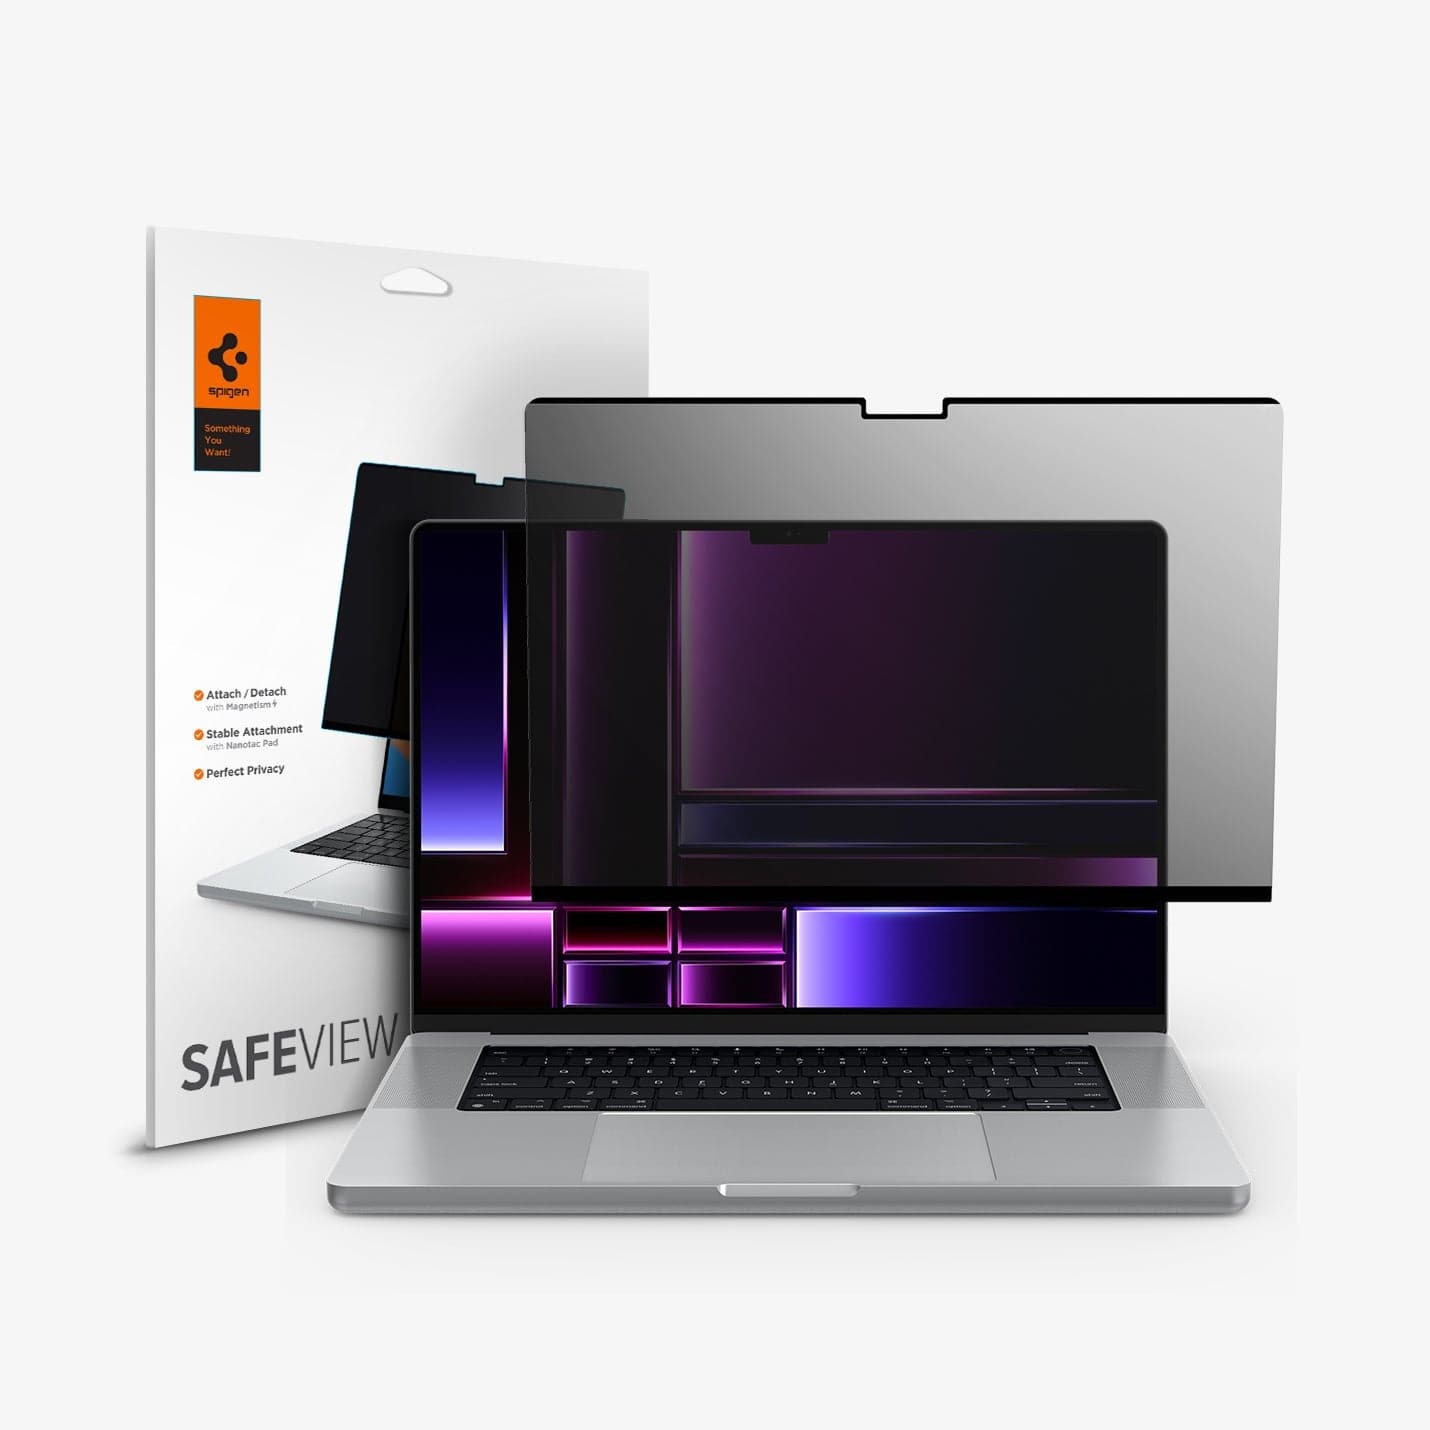 AFL06157 - Macbook Pro 16" Screen Protector Safe View showing the laptop, screen protector and packaging